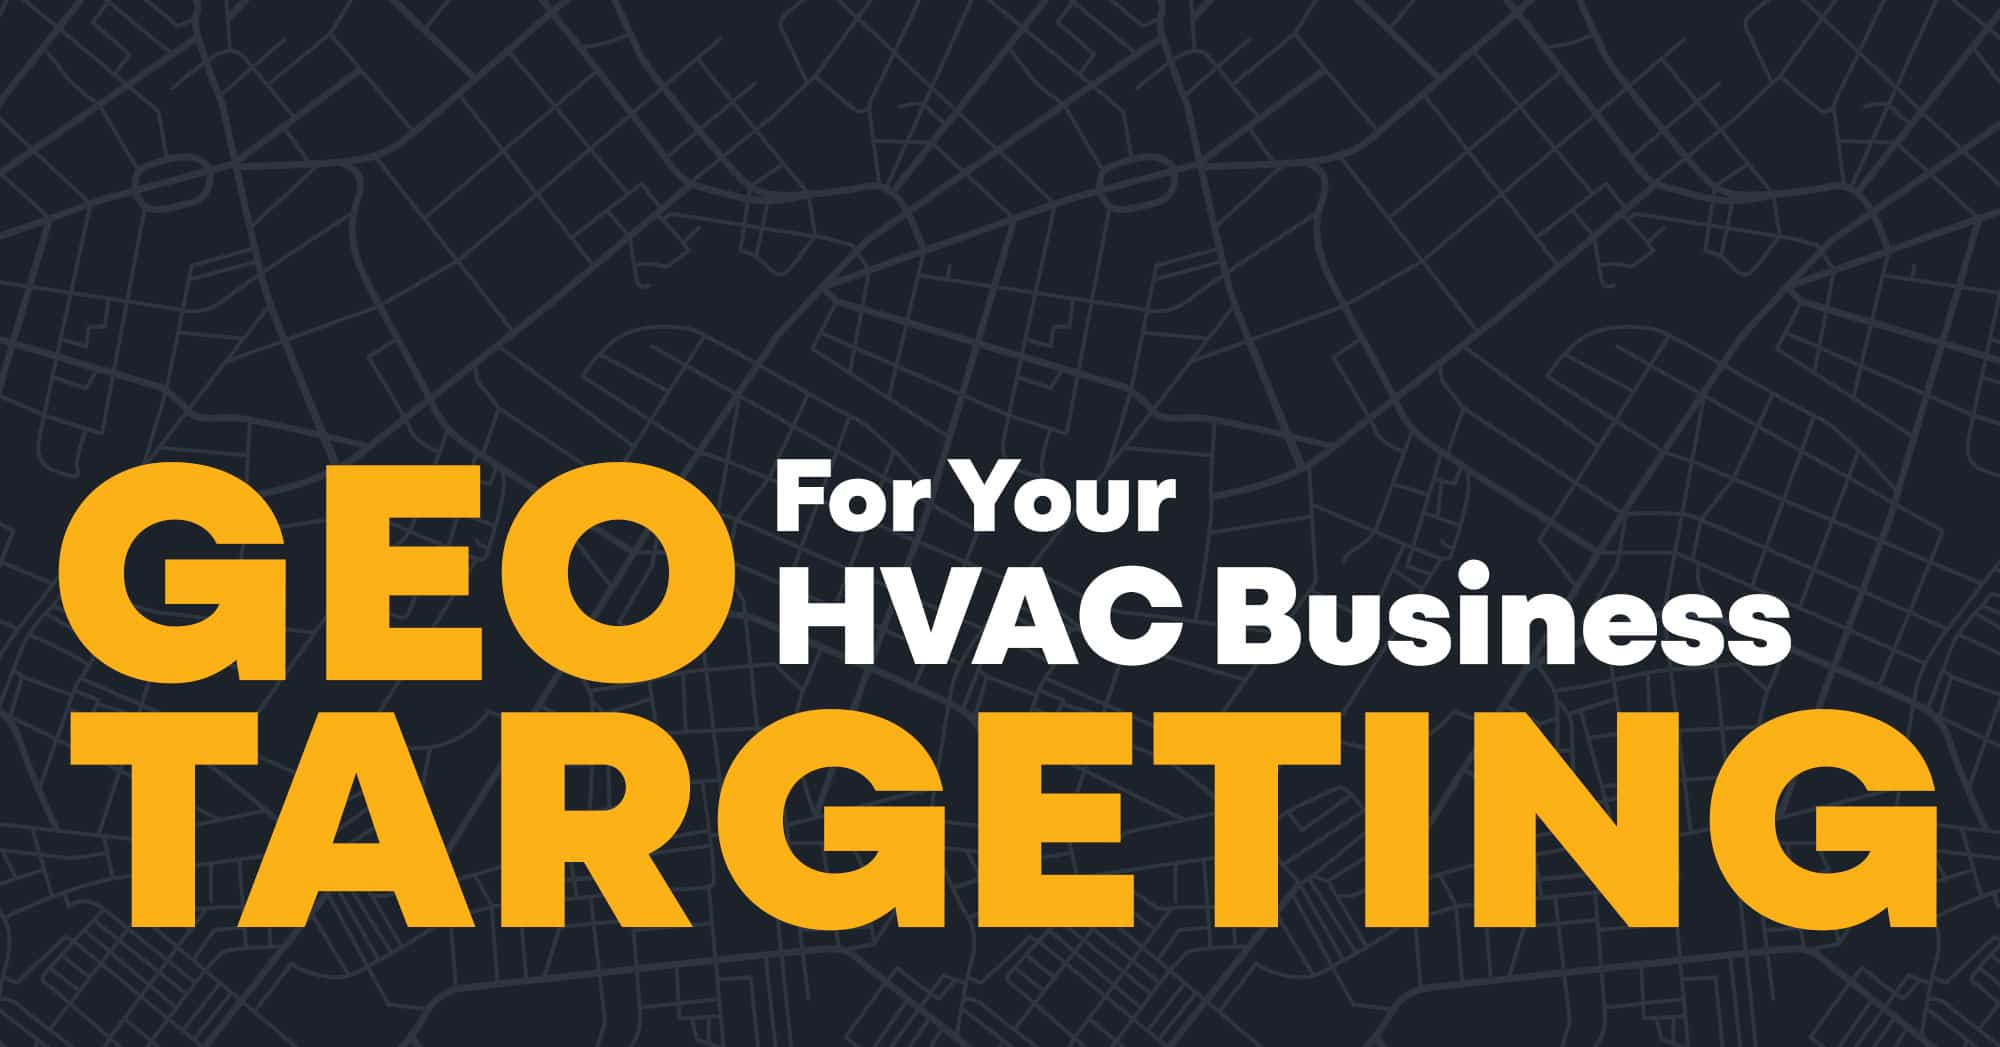 Geotargeting for your local HVAC business